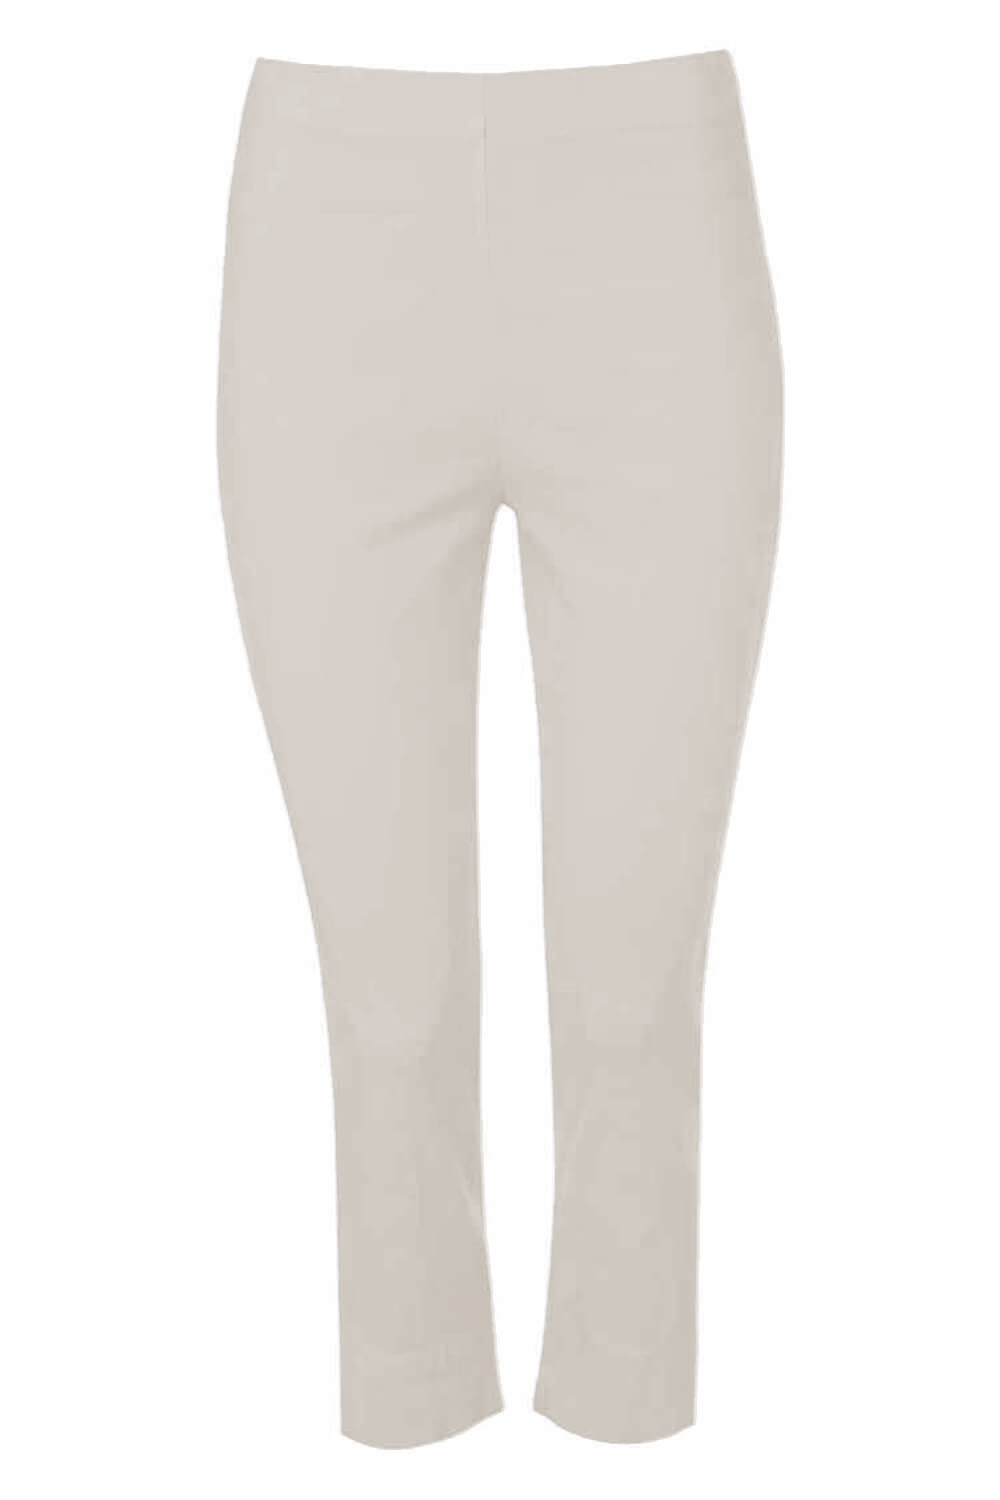 Stone Cropped Stretch Trouser, Image 4 of 4